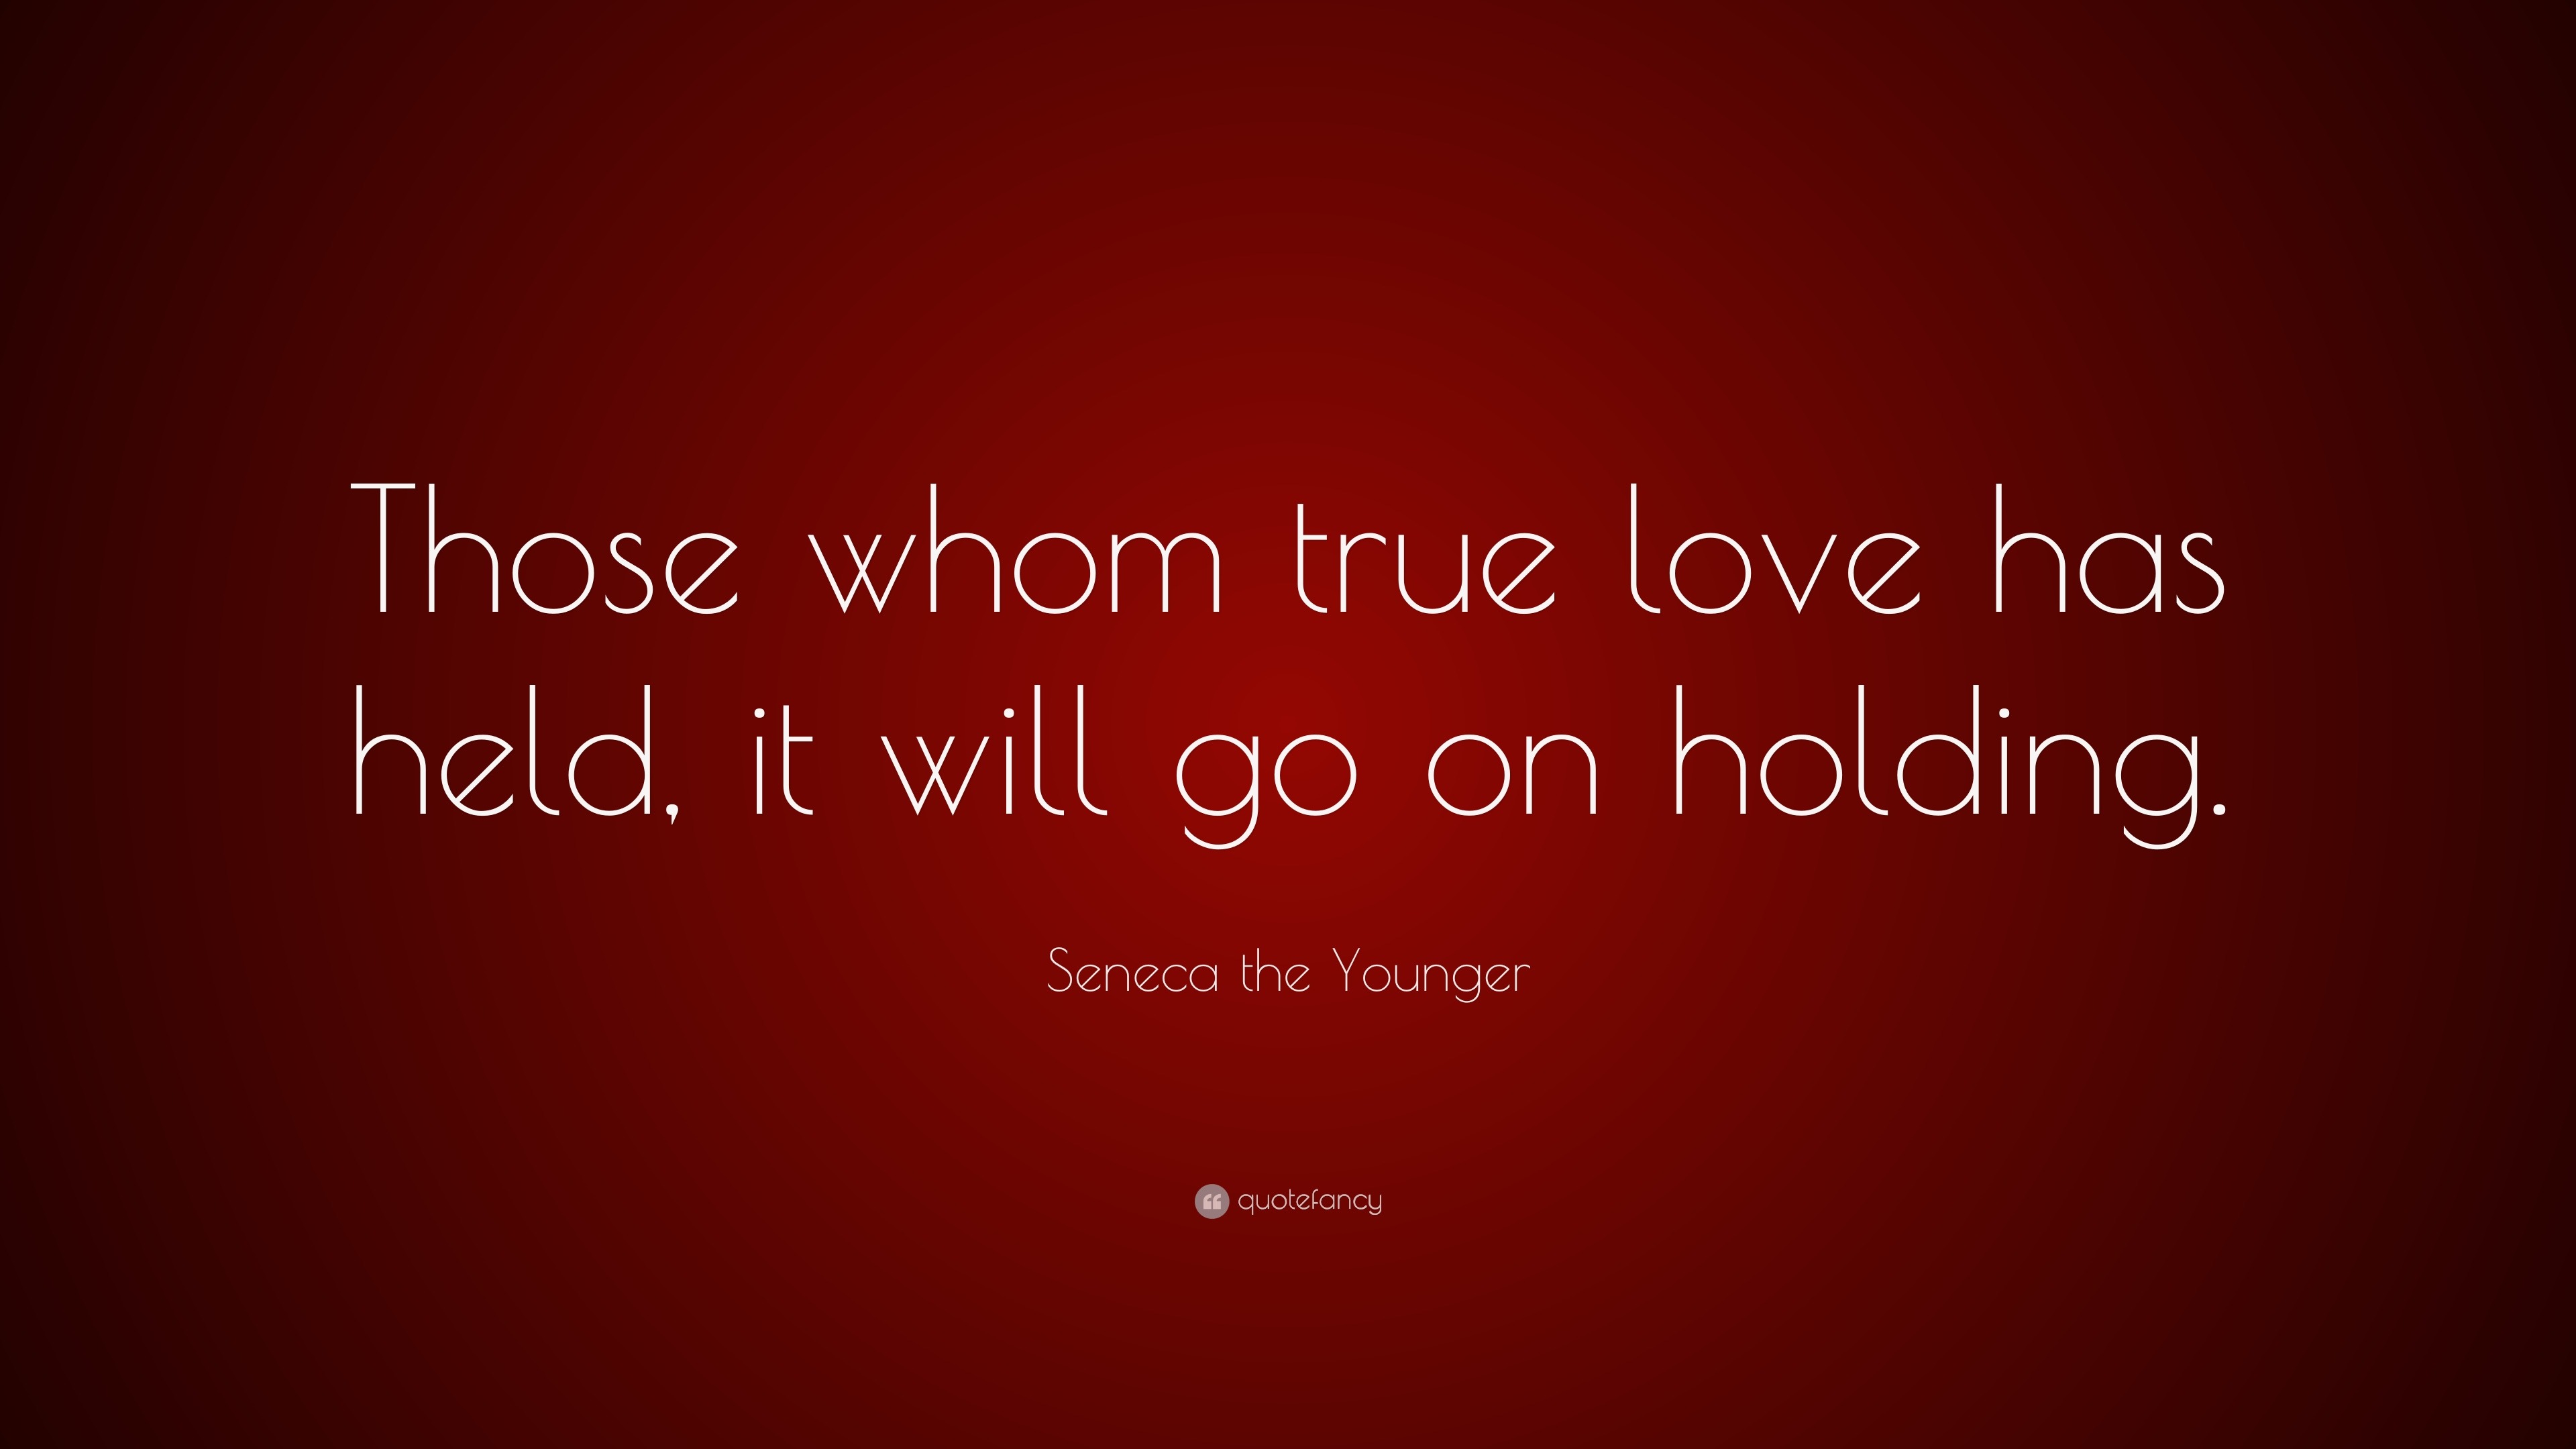 Seneca the Younger Quote “Those whom true love has held it will go